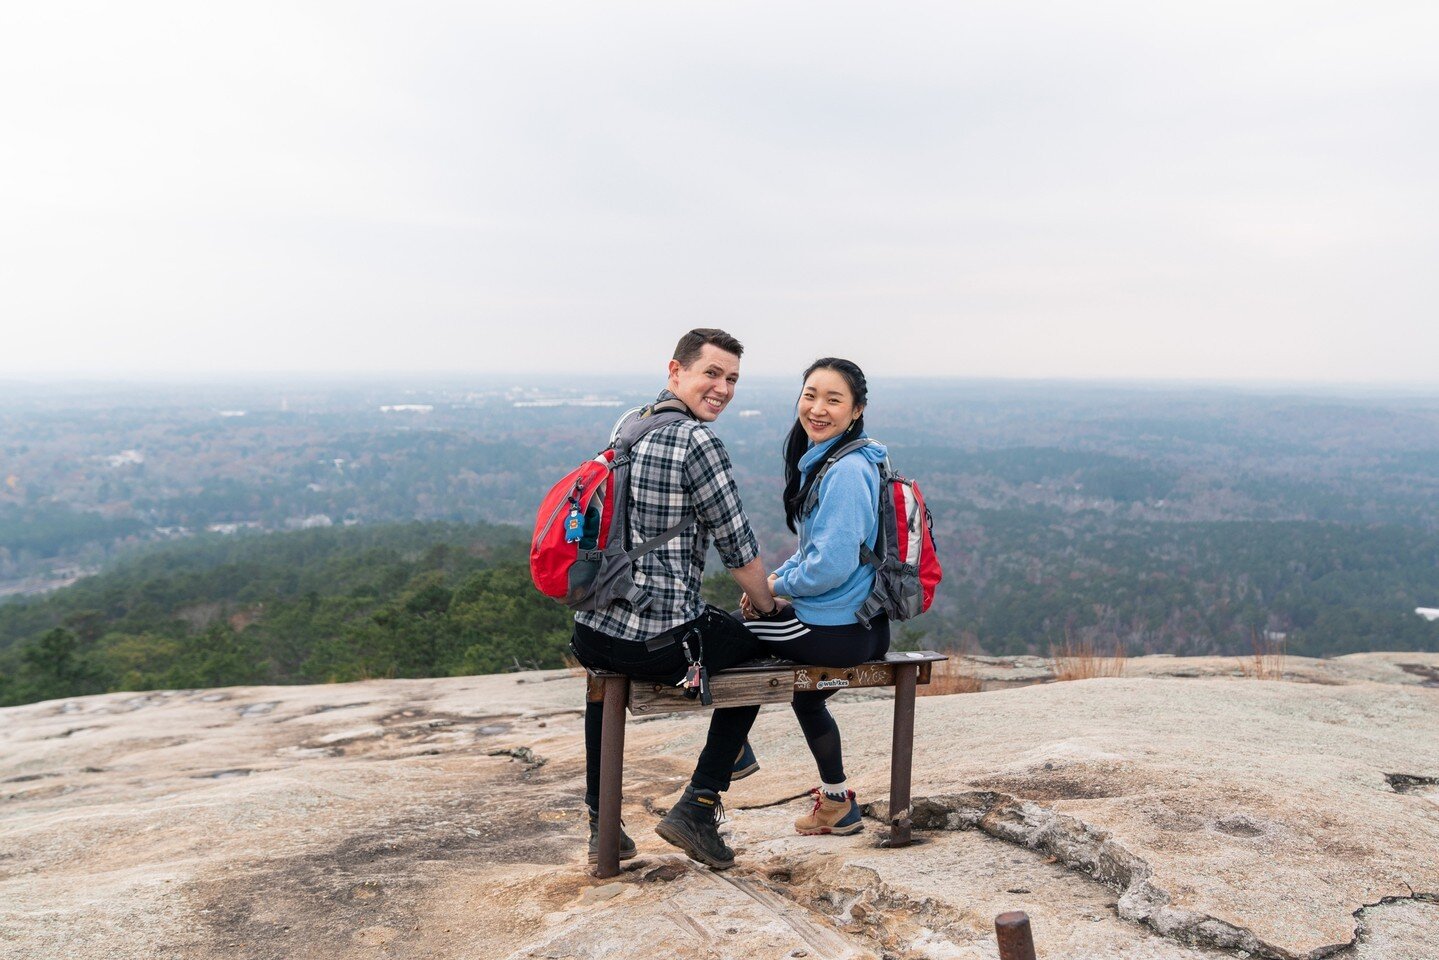 At the top of Stone Mountain enjoying the view!🗻
Matching backpacks with Korean bride and groom luggage tags! 🎒 🎎 
.
Subject @minjikim.archi @sethfjohnson
.⁠
Image by @rabbittrax
.⁠
&copy; Rabbit TraX⁠
.⁠
.⁠
.⁠
.⁠
.⁠
#rabbittrax #overland #overlan